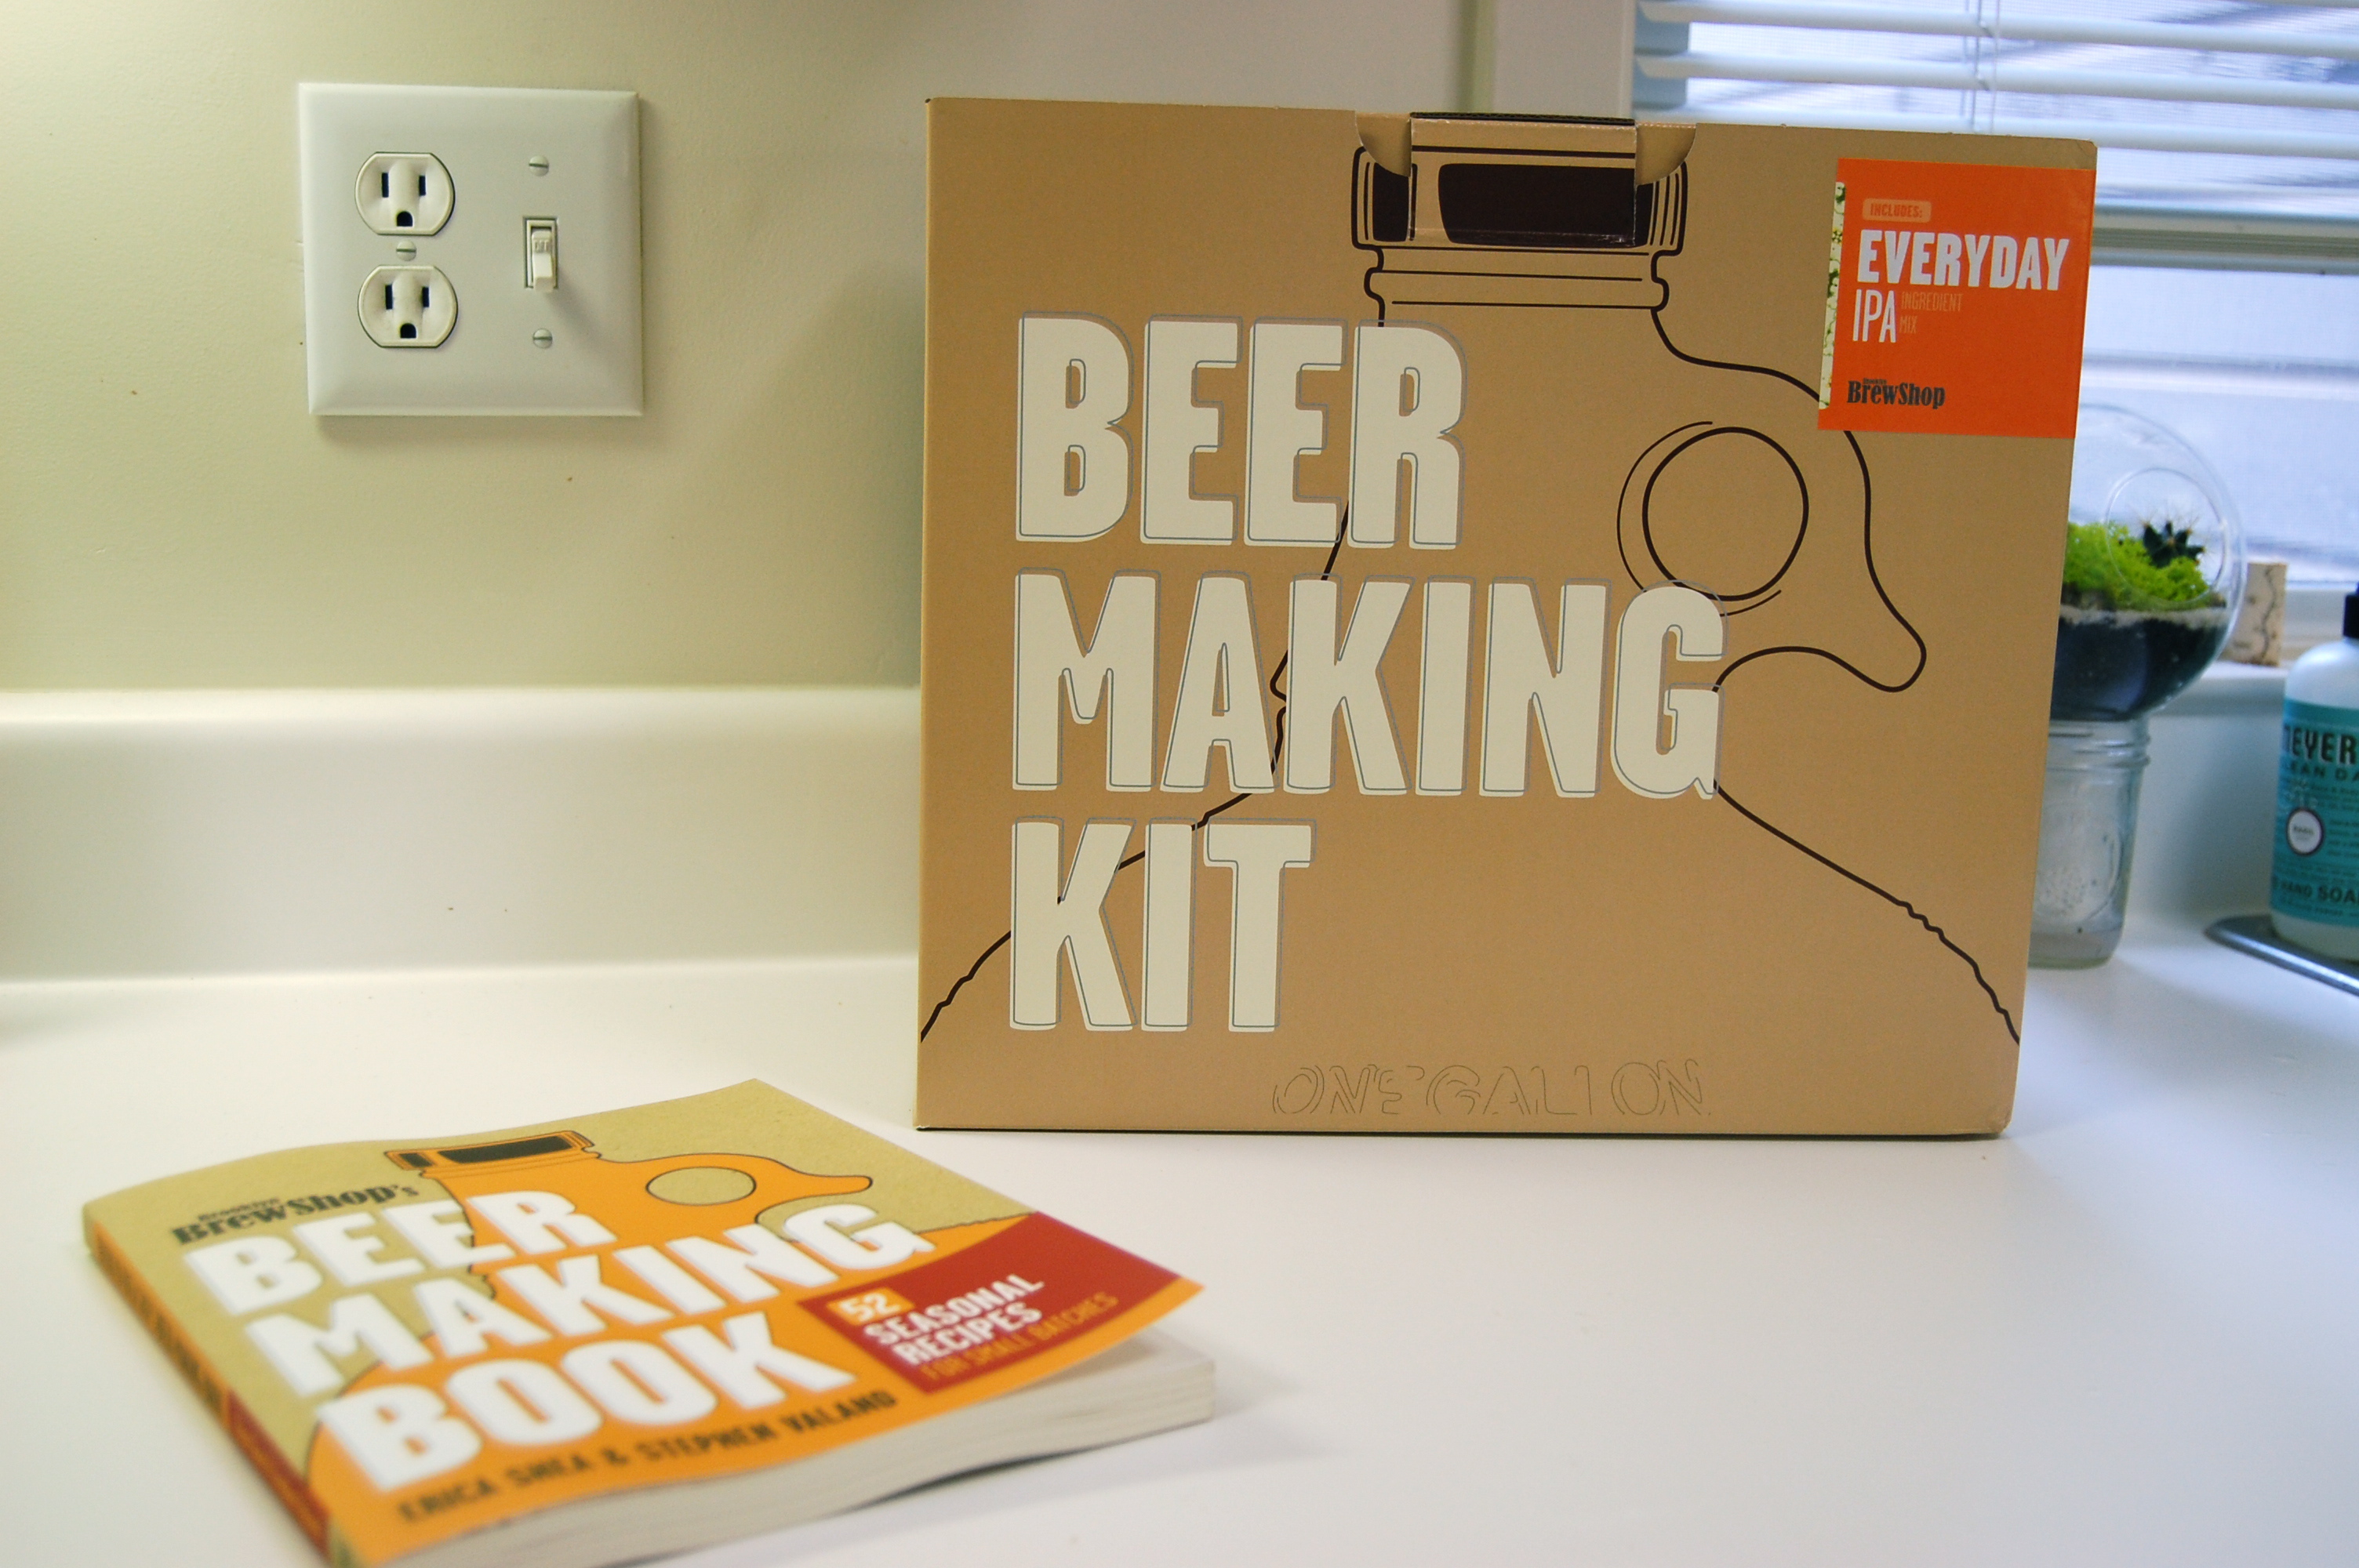 Making Beer with the Brooklyn Brew Shop Kit